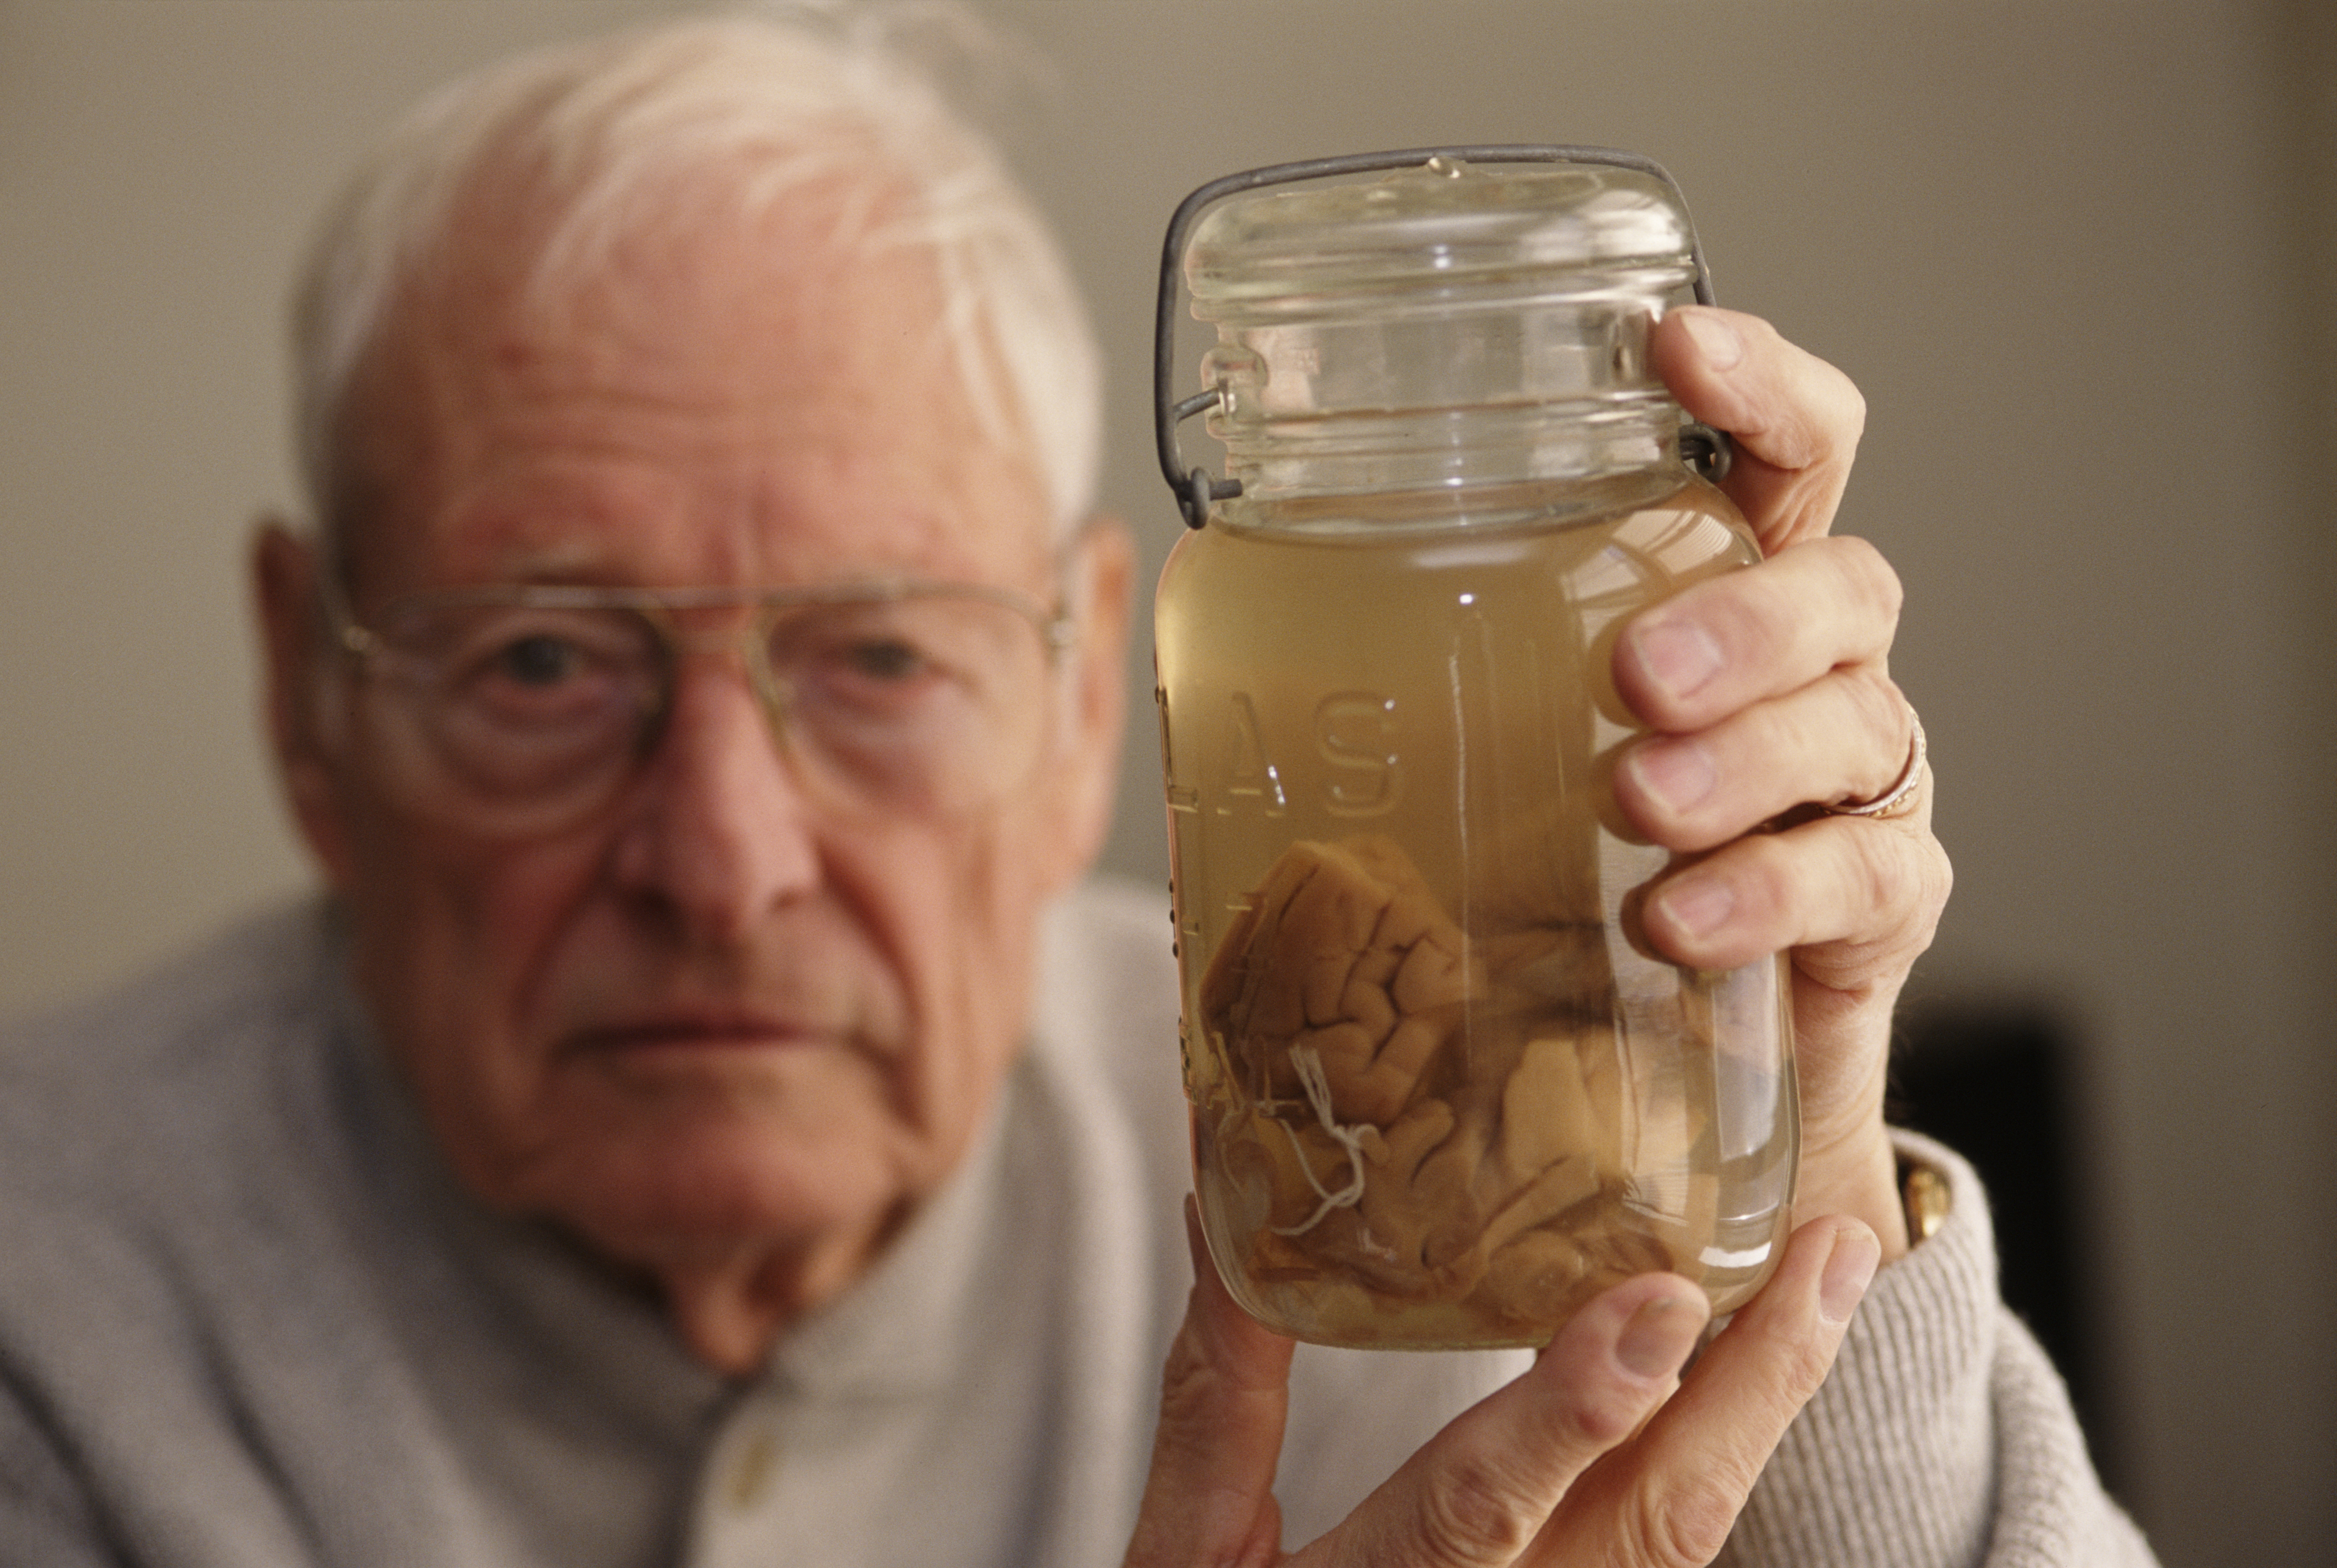 Thomas Stoltz Harvey holds a jar containing a fragment of Albert Einstein's brain in 1994. Harvey oversaw Einstein's autopsy in 1955 and kept a large portion of the physicist's brain in his personal possession for more than 40 years.